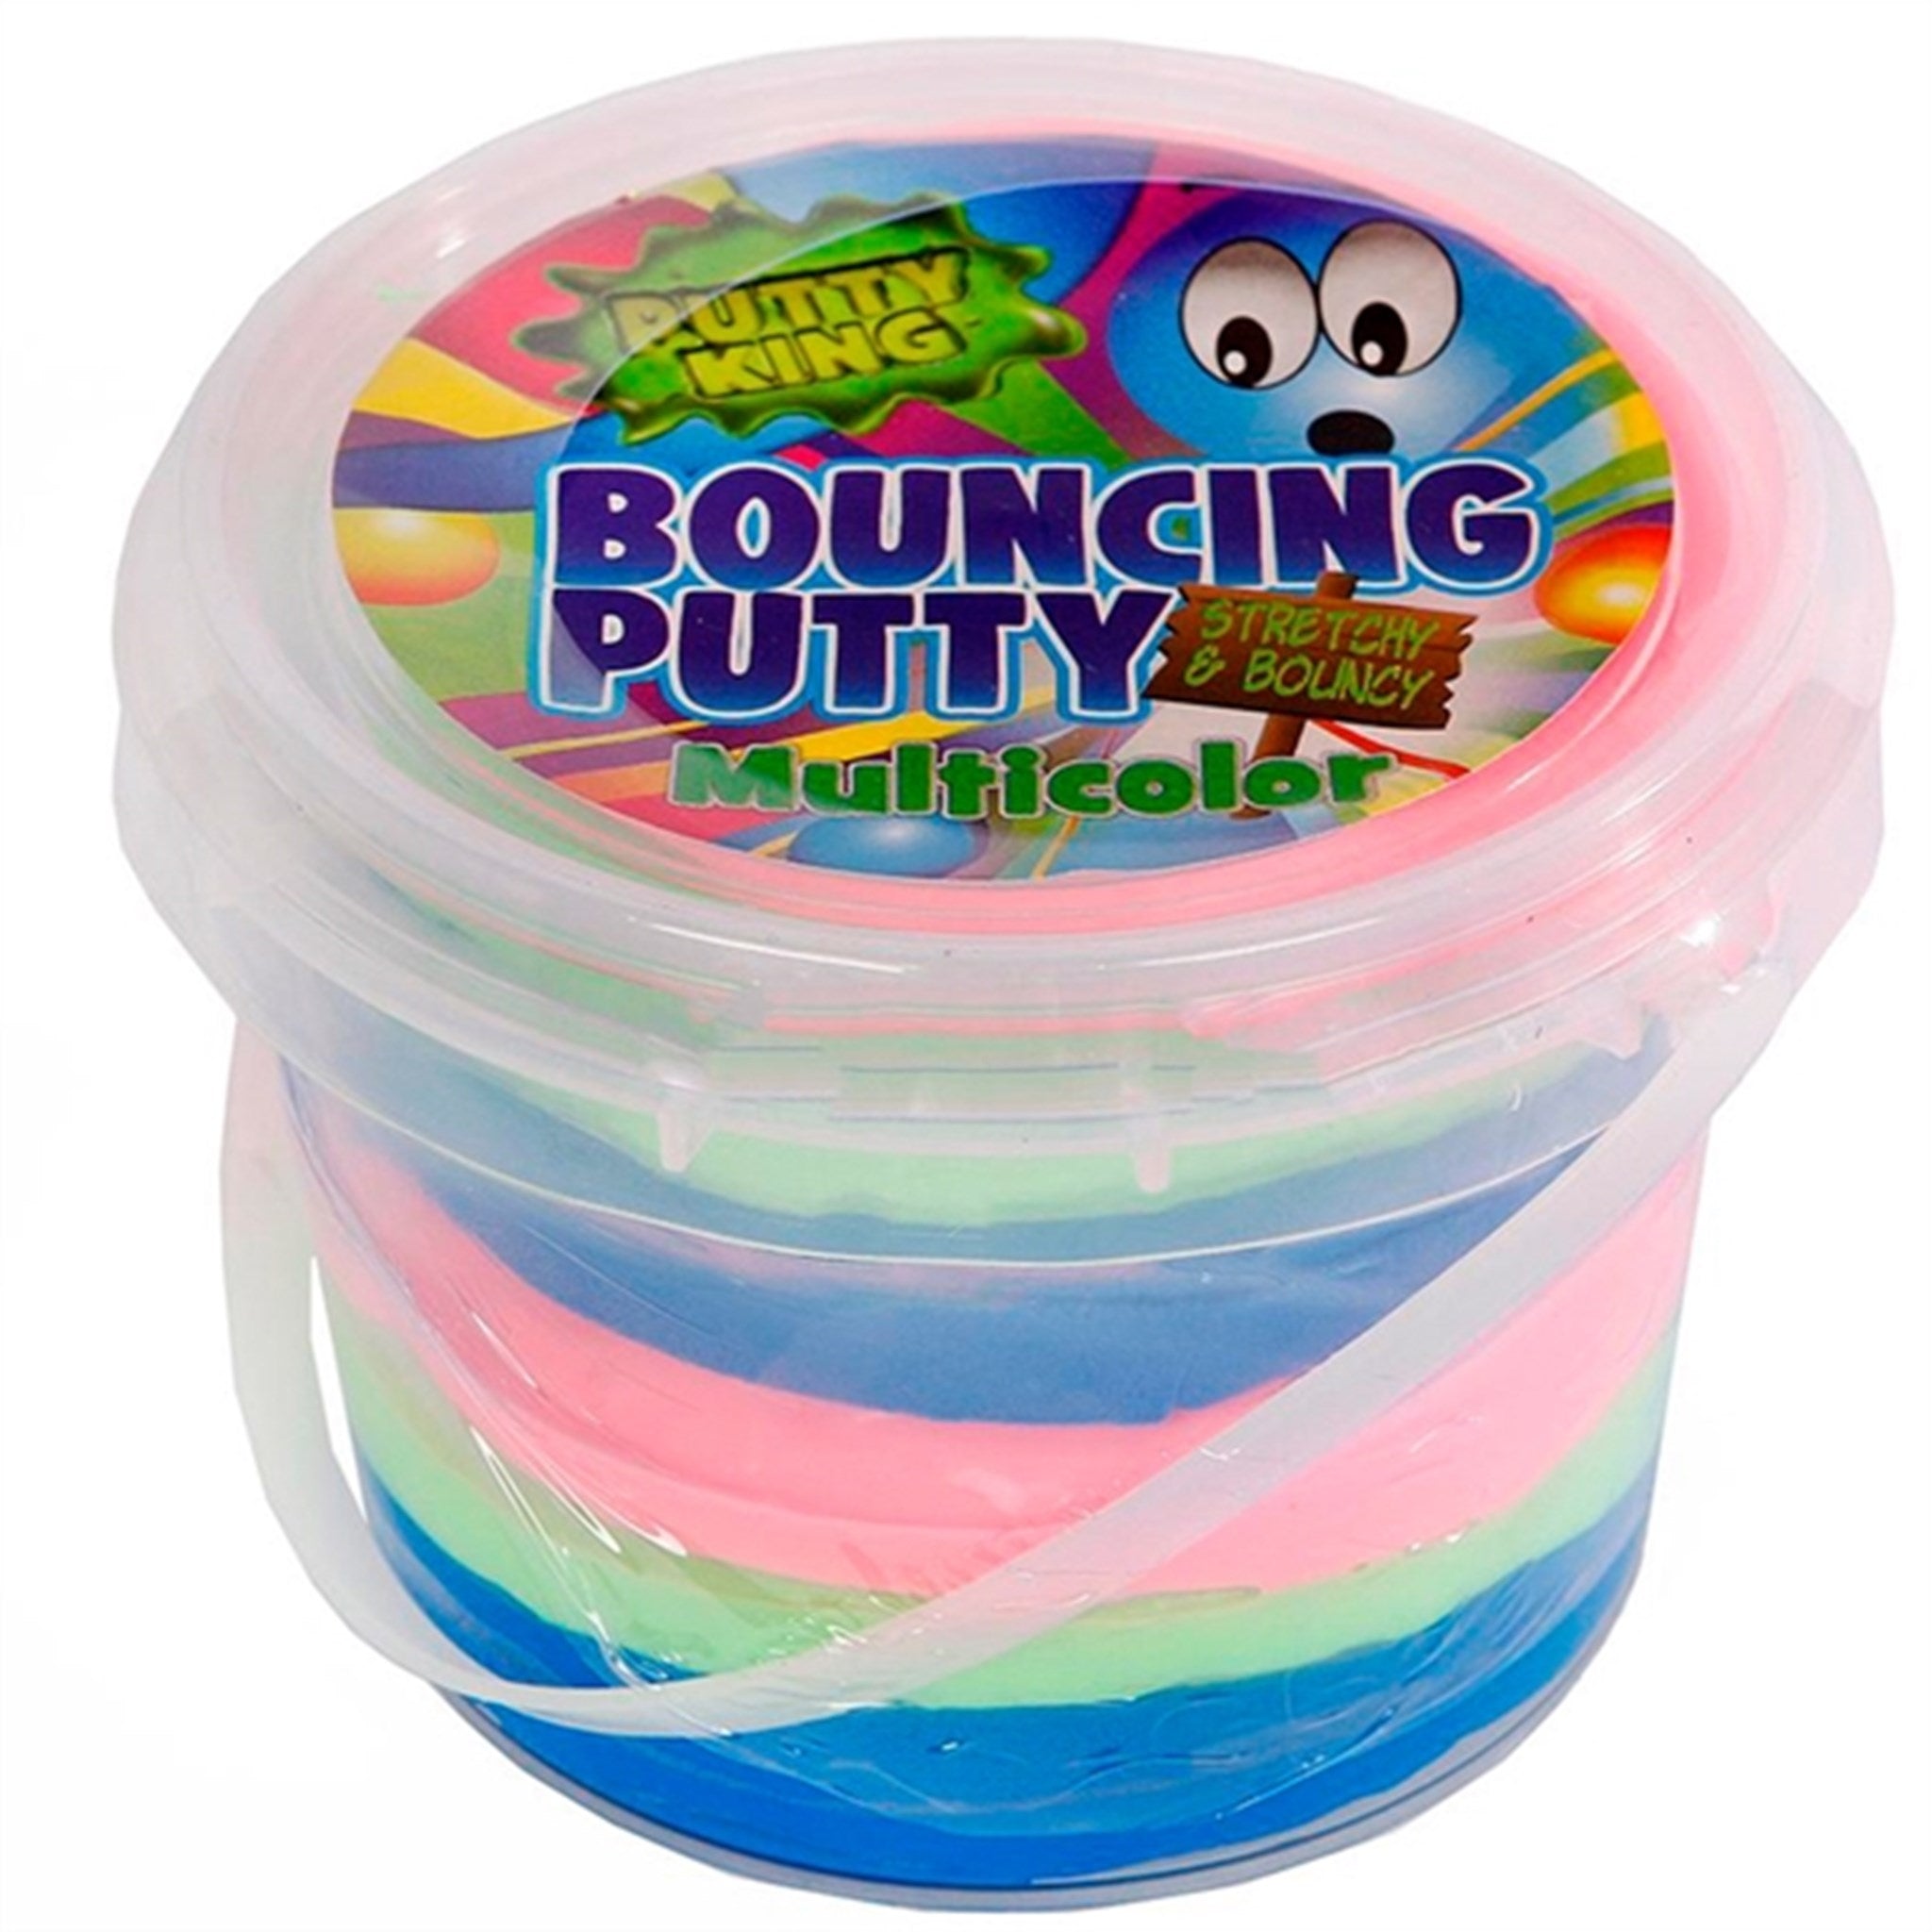 Pocket Money Putty King Bouncing Putty Multicolor 110 g